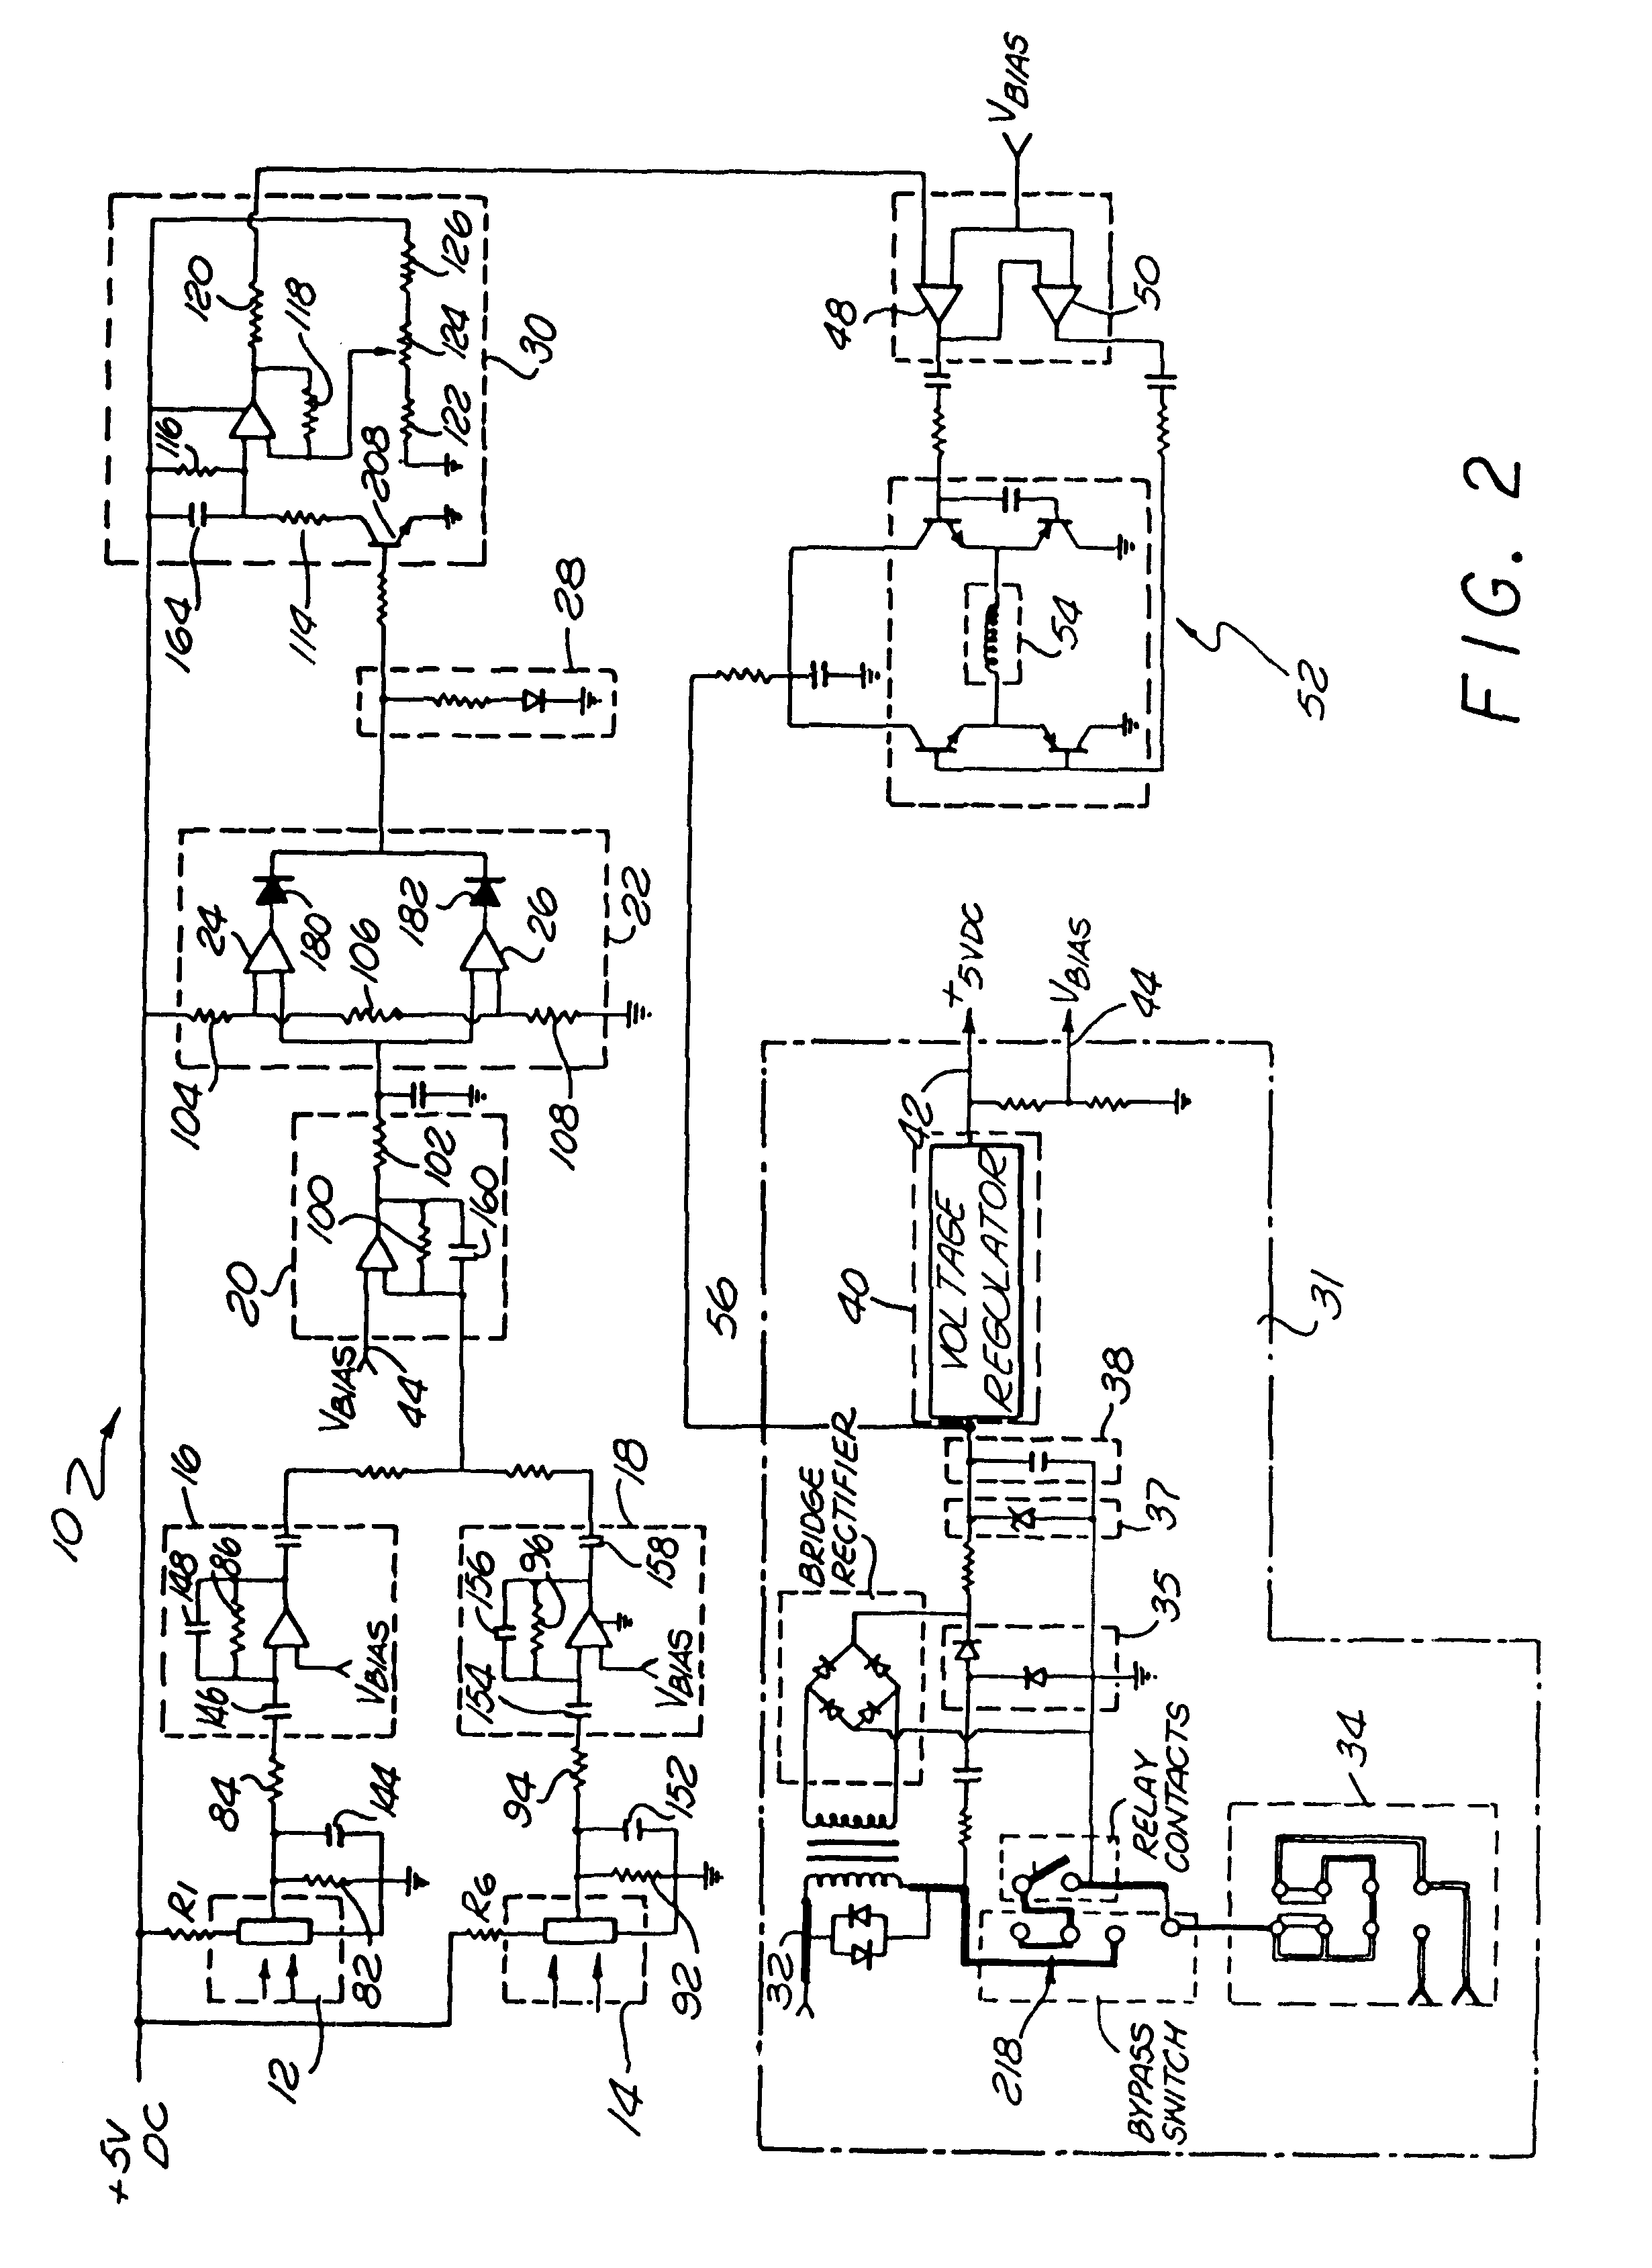 Fully automatic energy efficient lighting control and method of making same